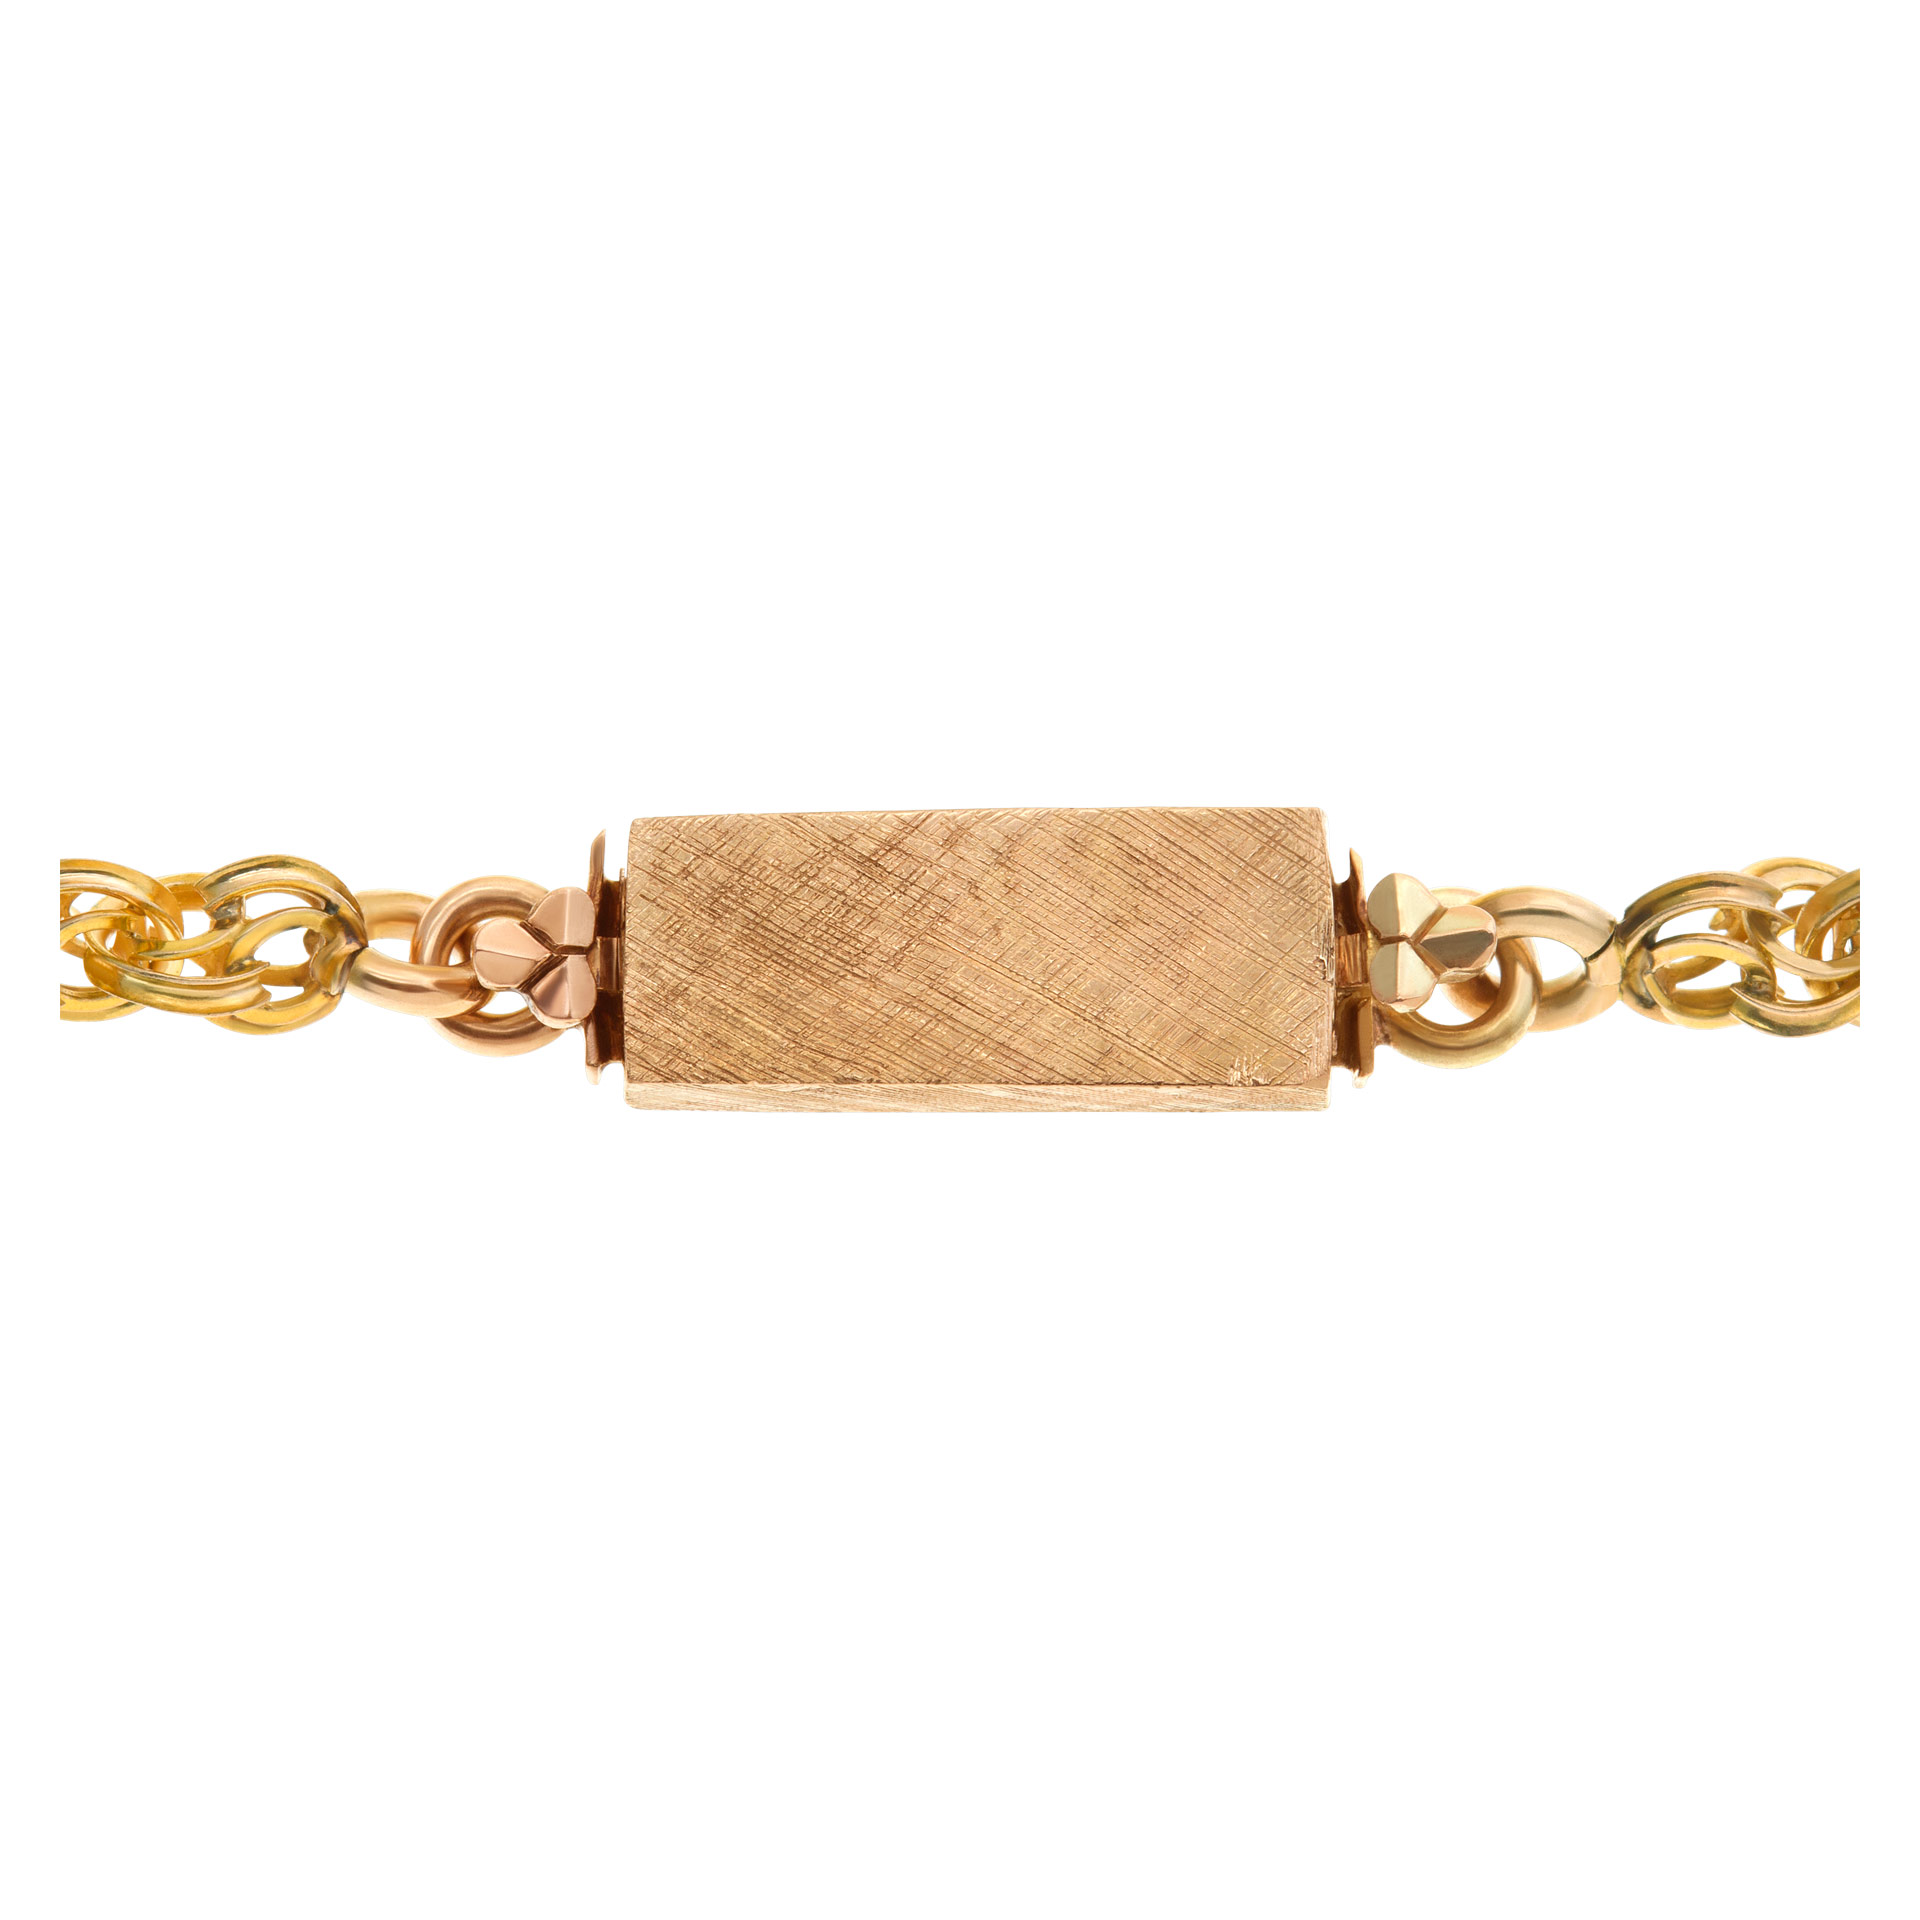 Intricate 14k yellow gold link necklace. Width: 4.8mm. Length: 20 inches. image 3